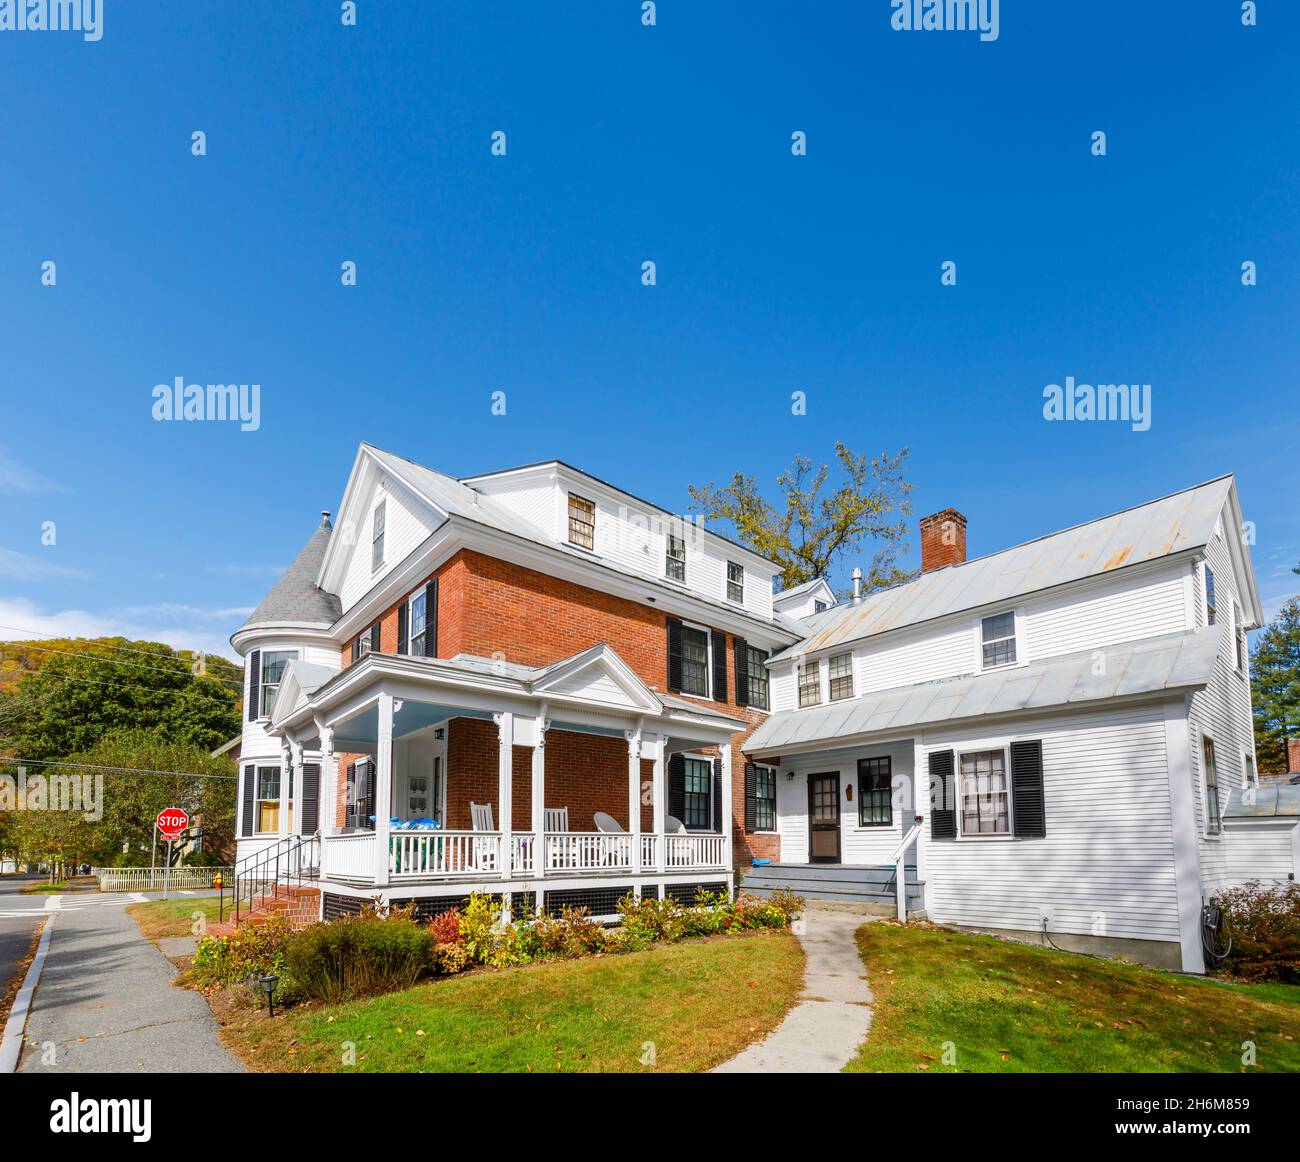 Typical local style large white clapboard faced house with a verandah in Woodstock, Vermont, New England, USA Stock Photo